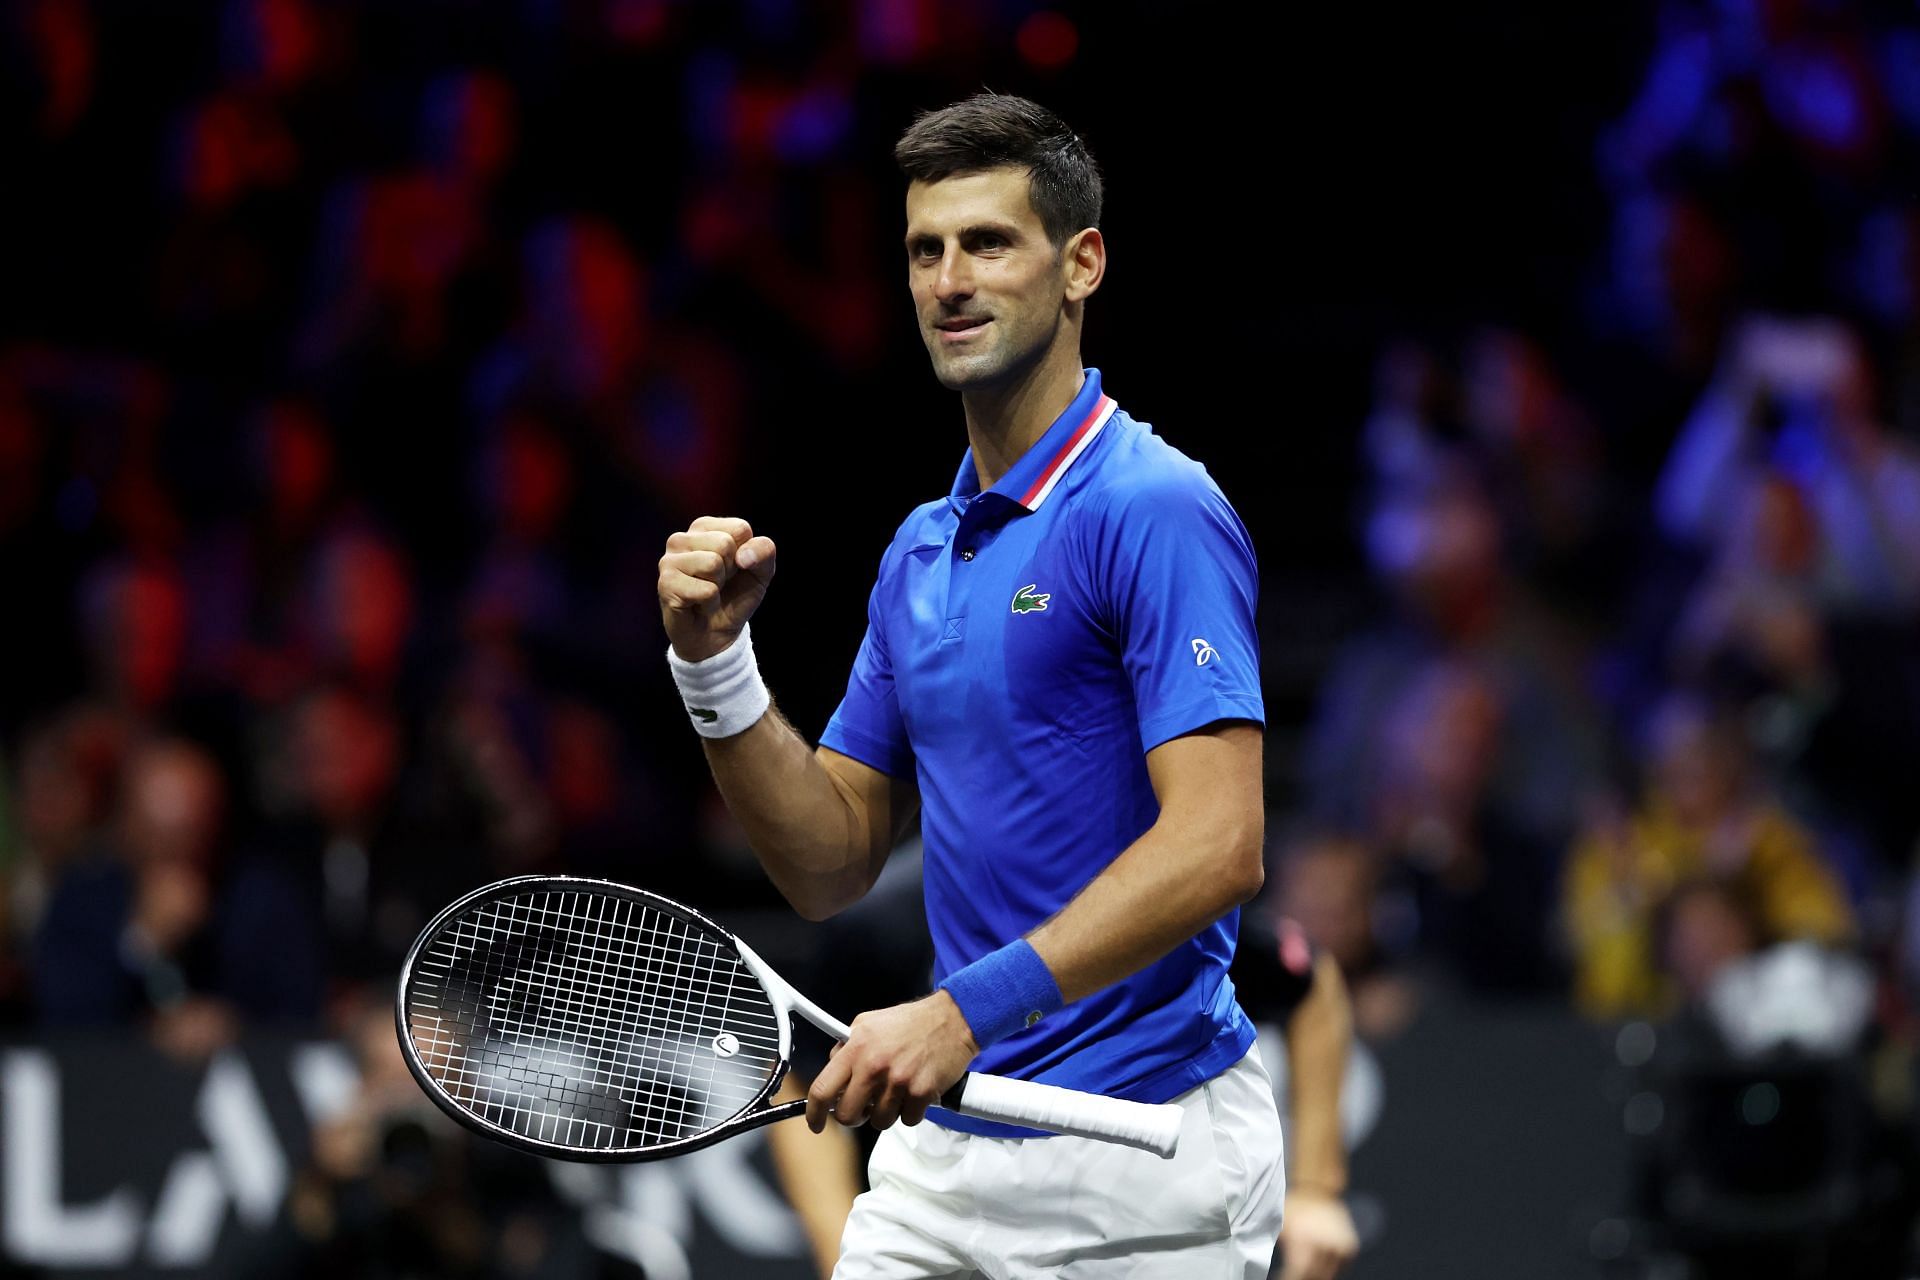 Paris Masters 2022 Where to watch, TV schedule, live streaming details and more